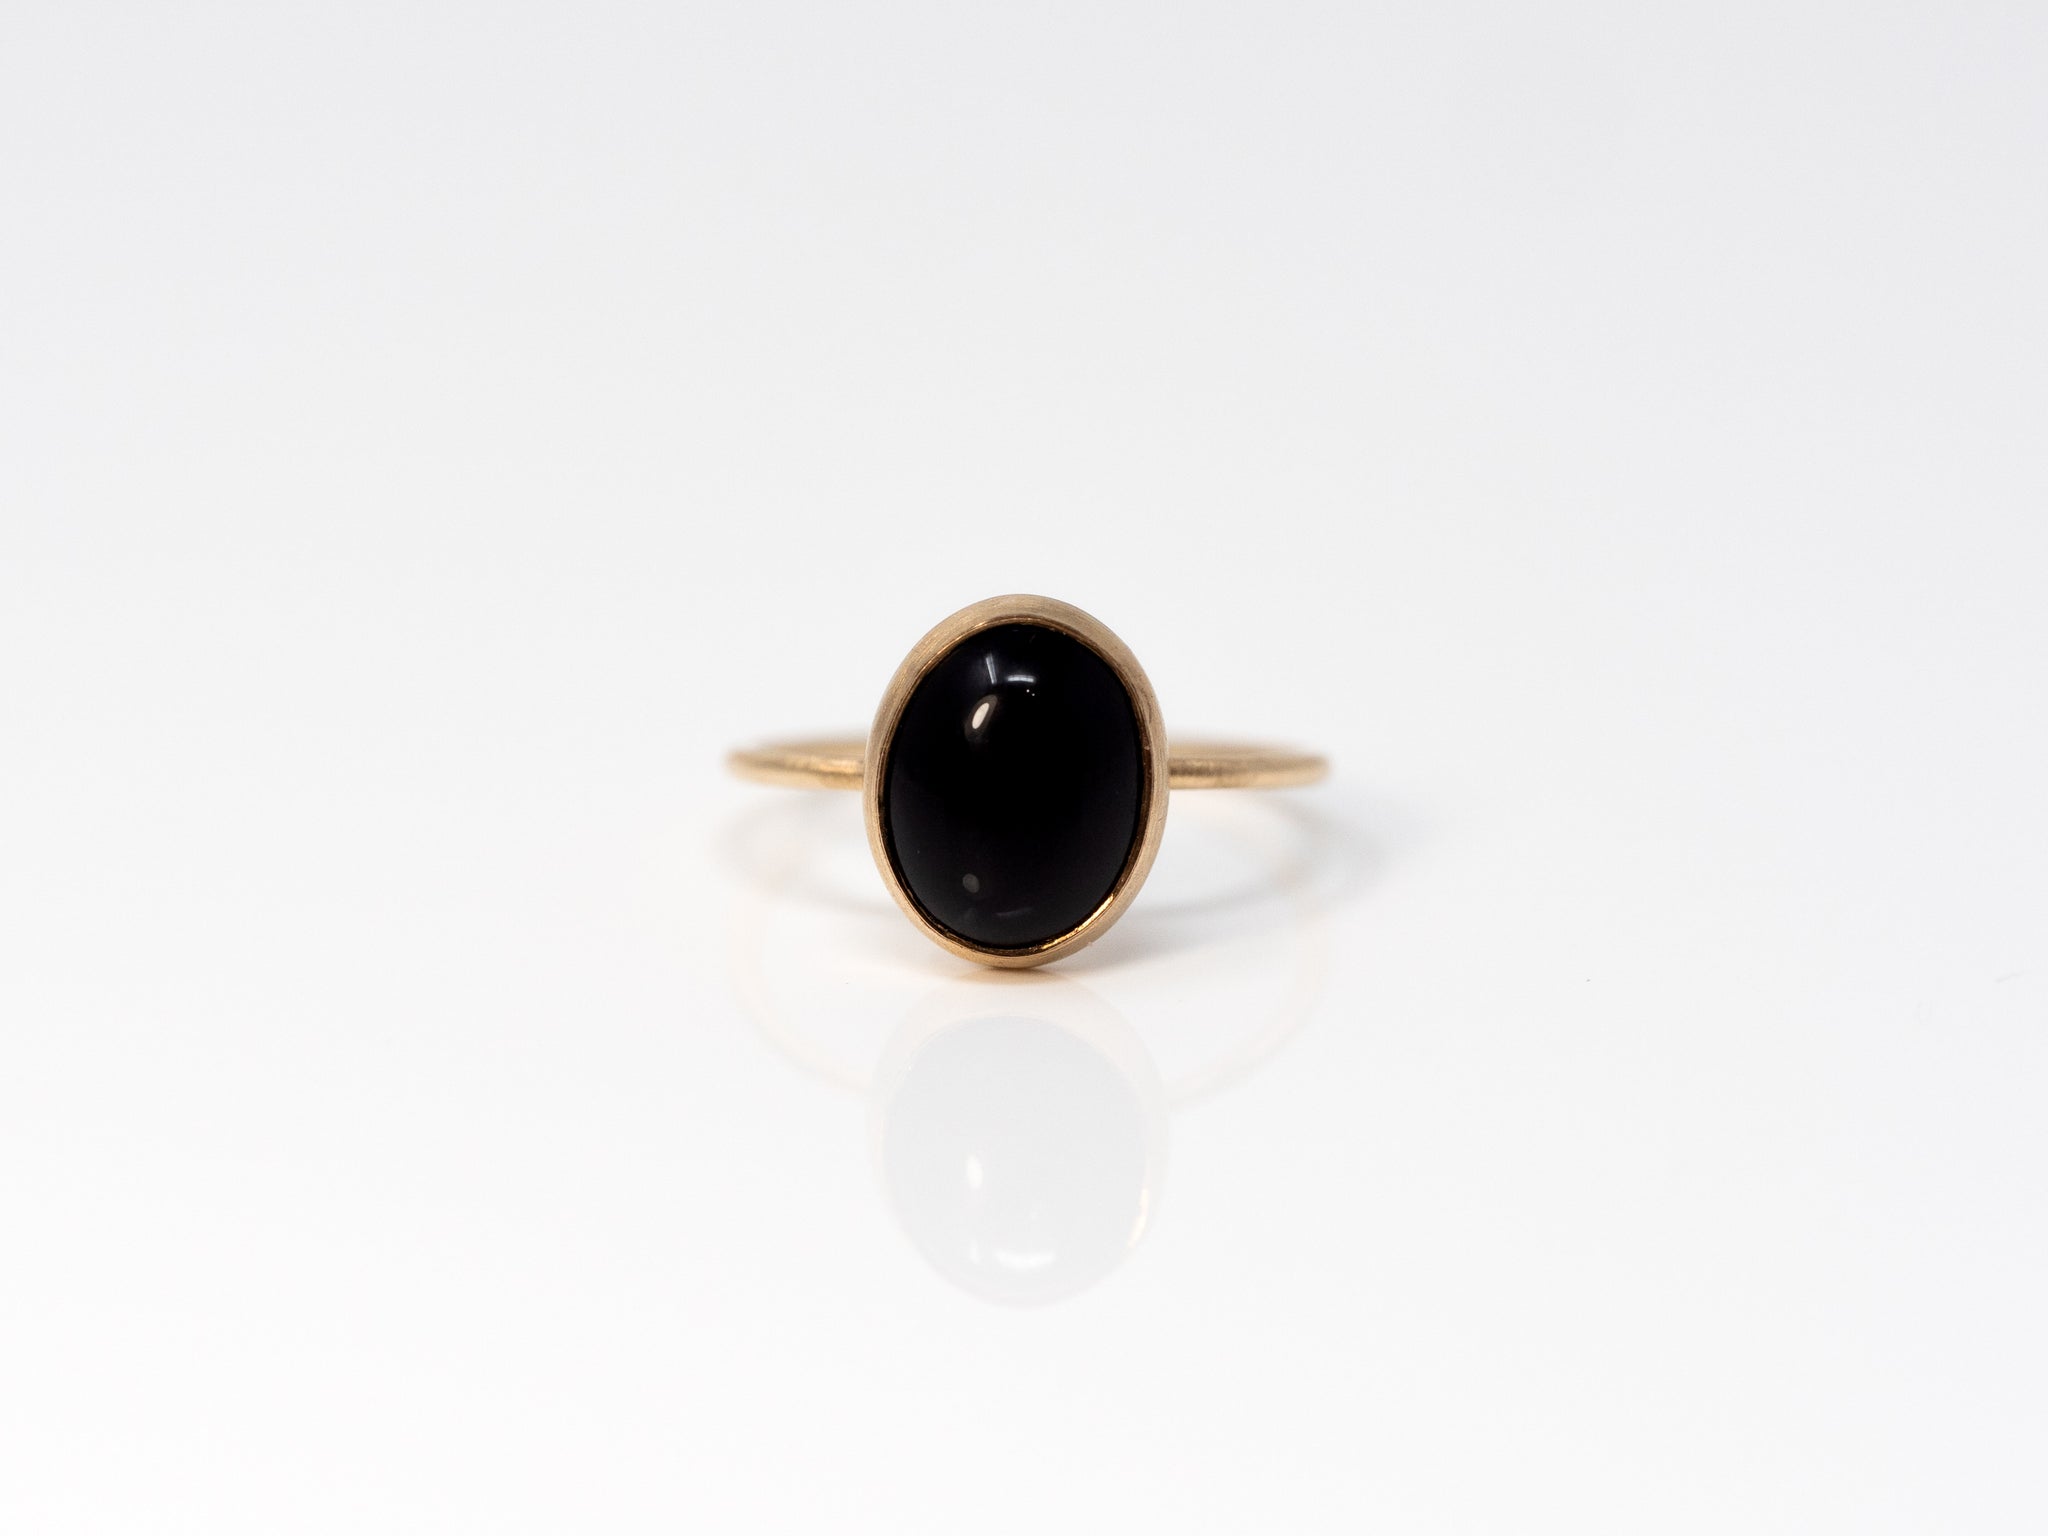 Orion Onyx Ring in 14K Gold Filled at a Size 7